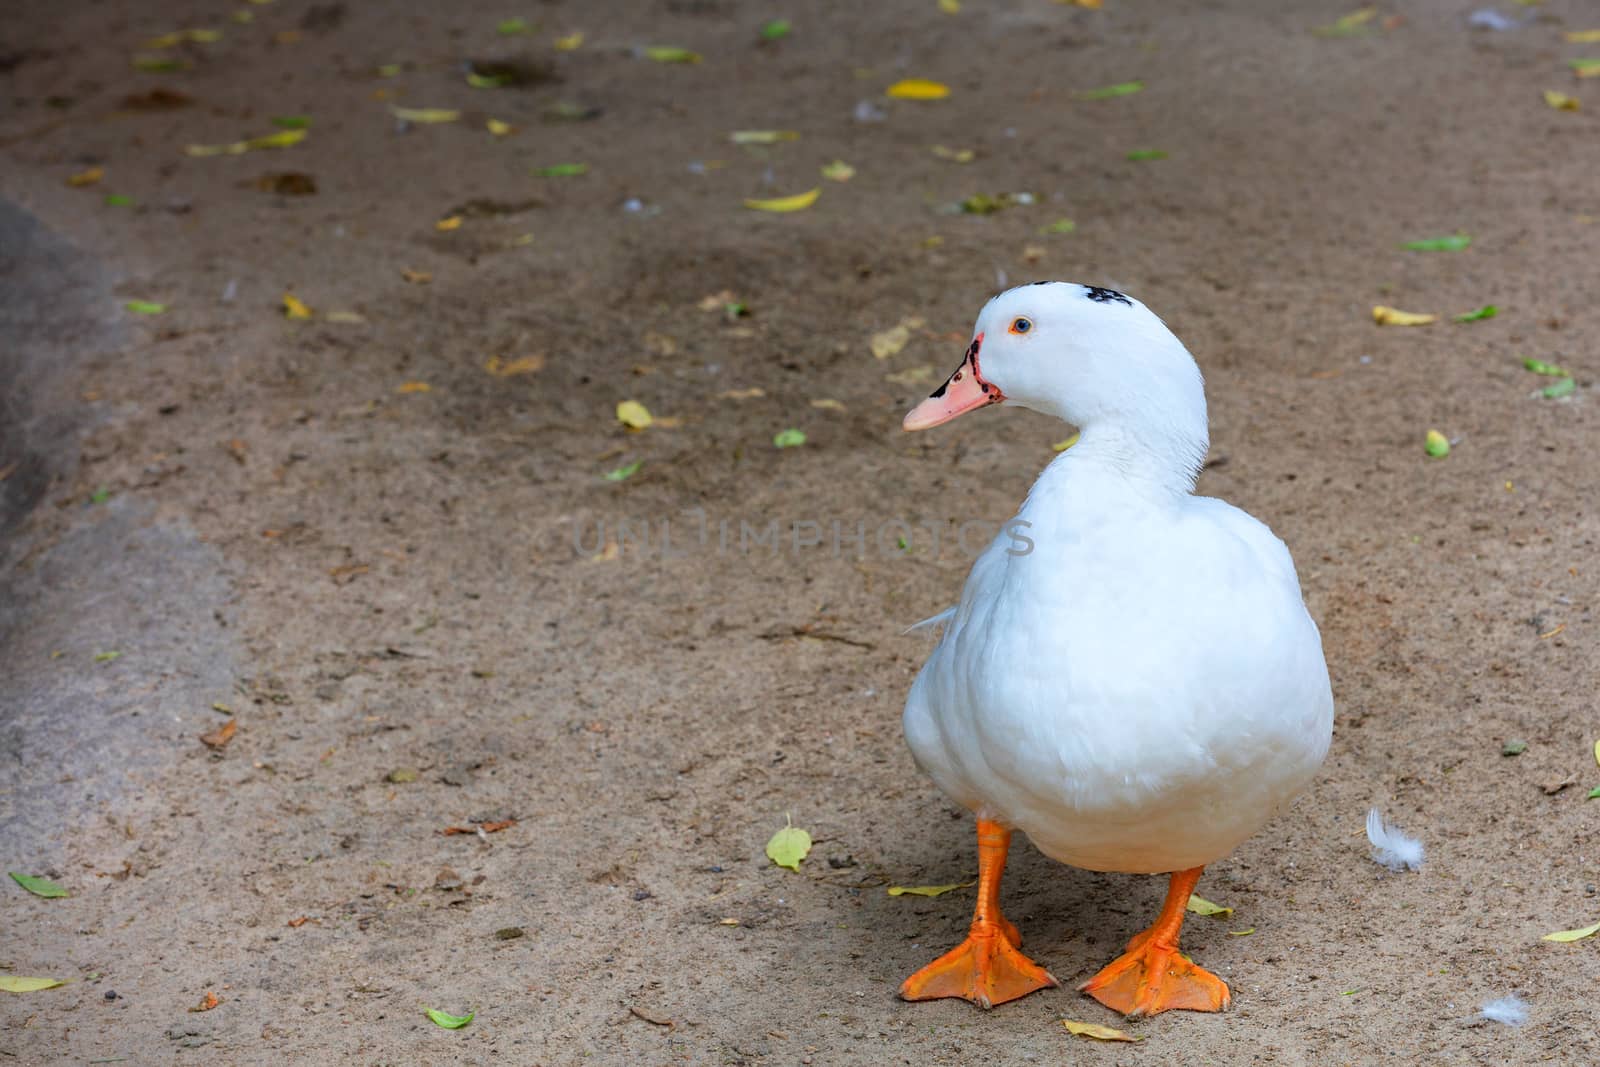 A white duck with bright orange paws walks along the sandy ground and looks to the left, copy space.